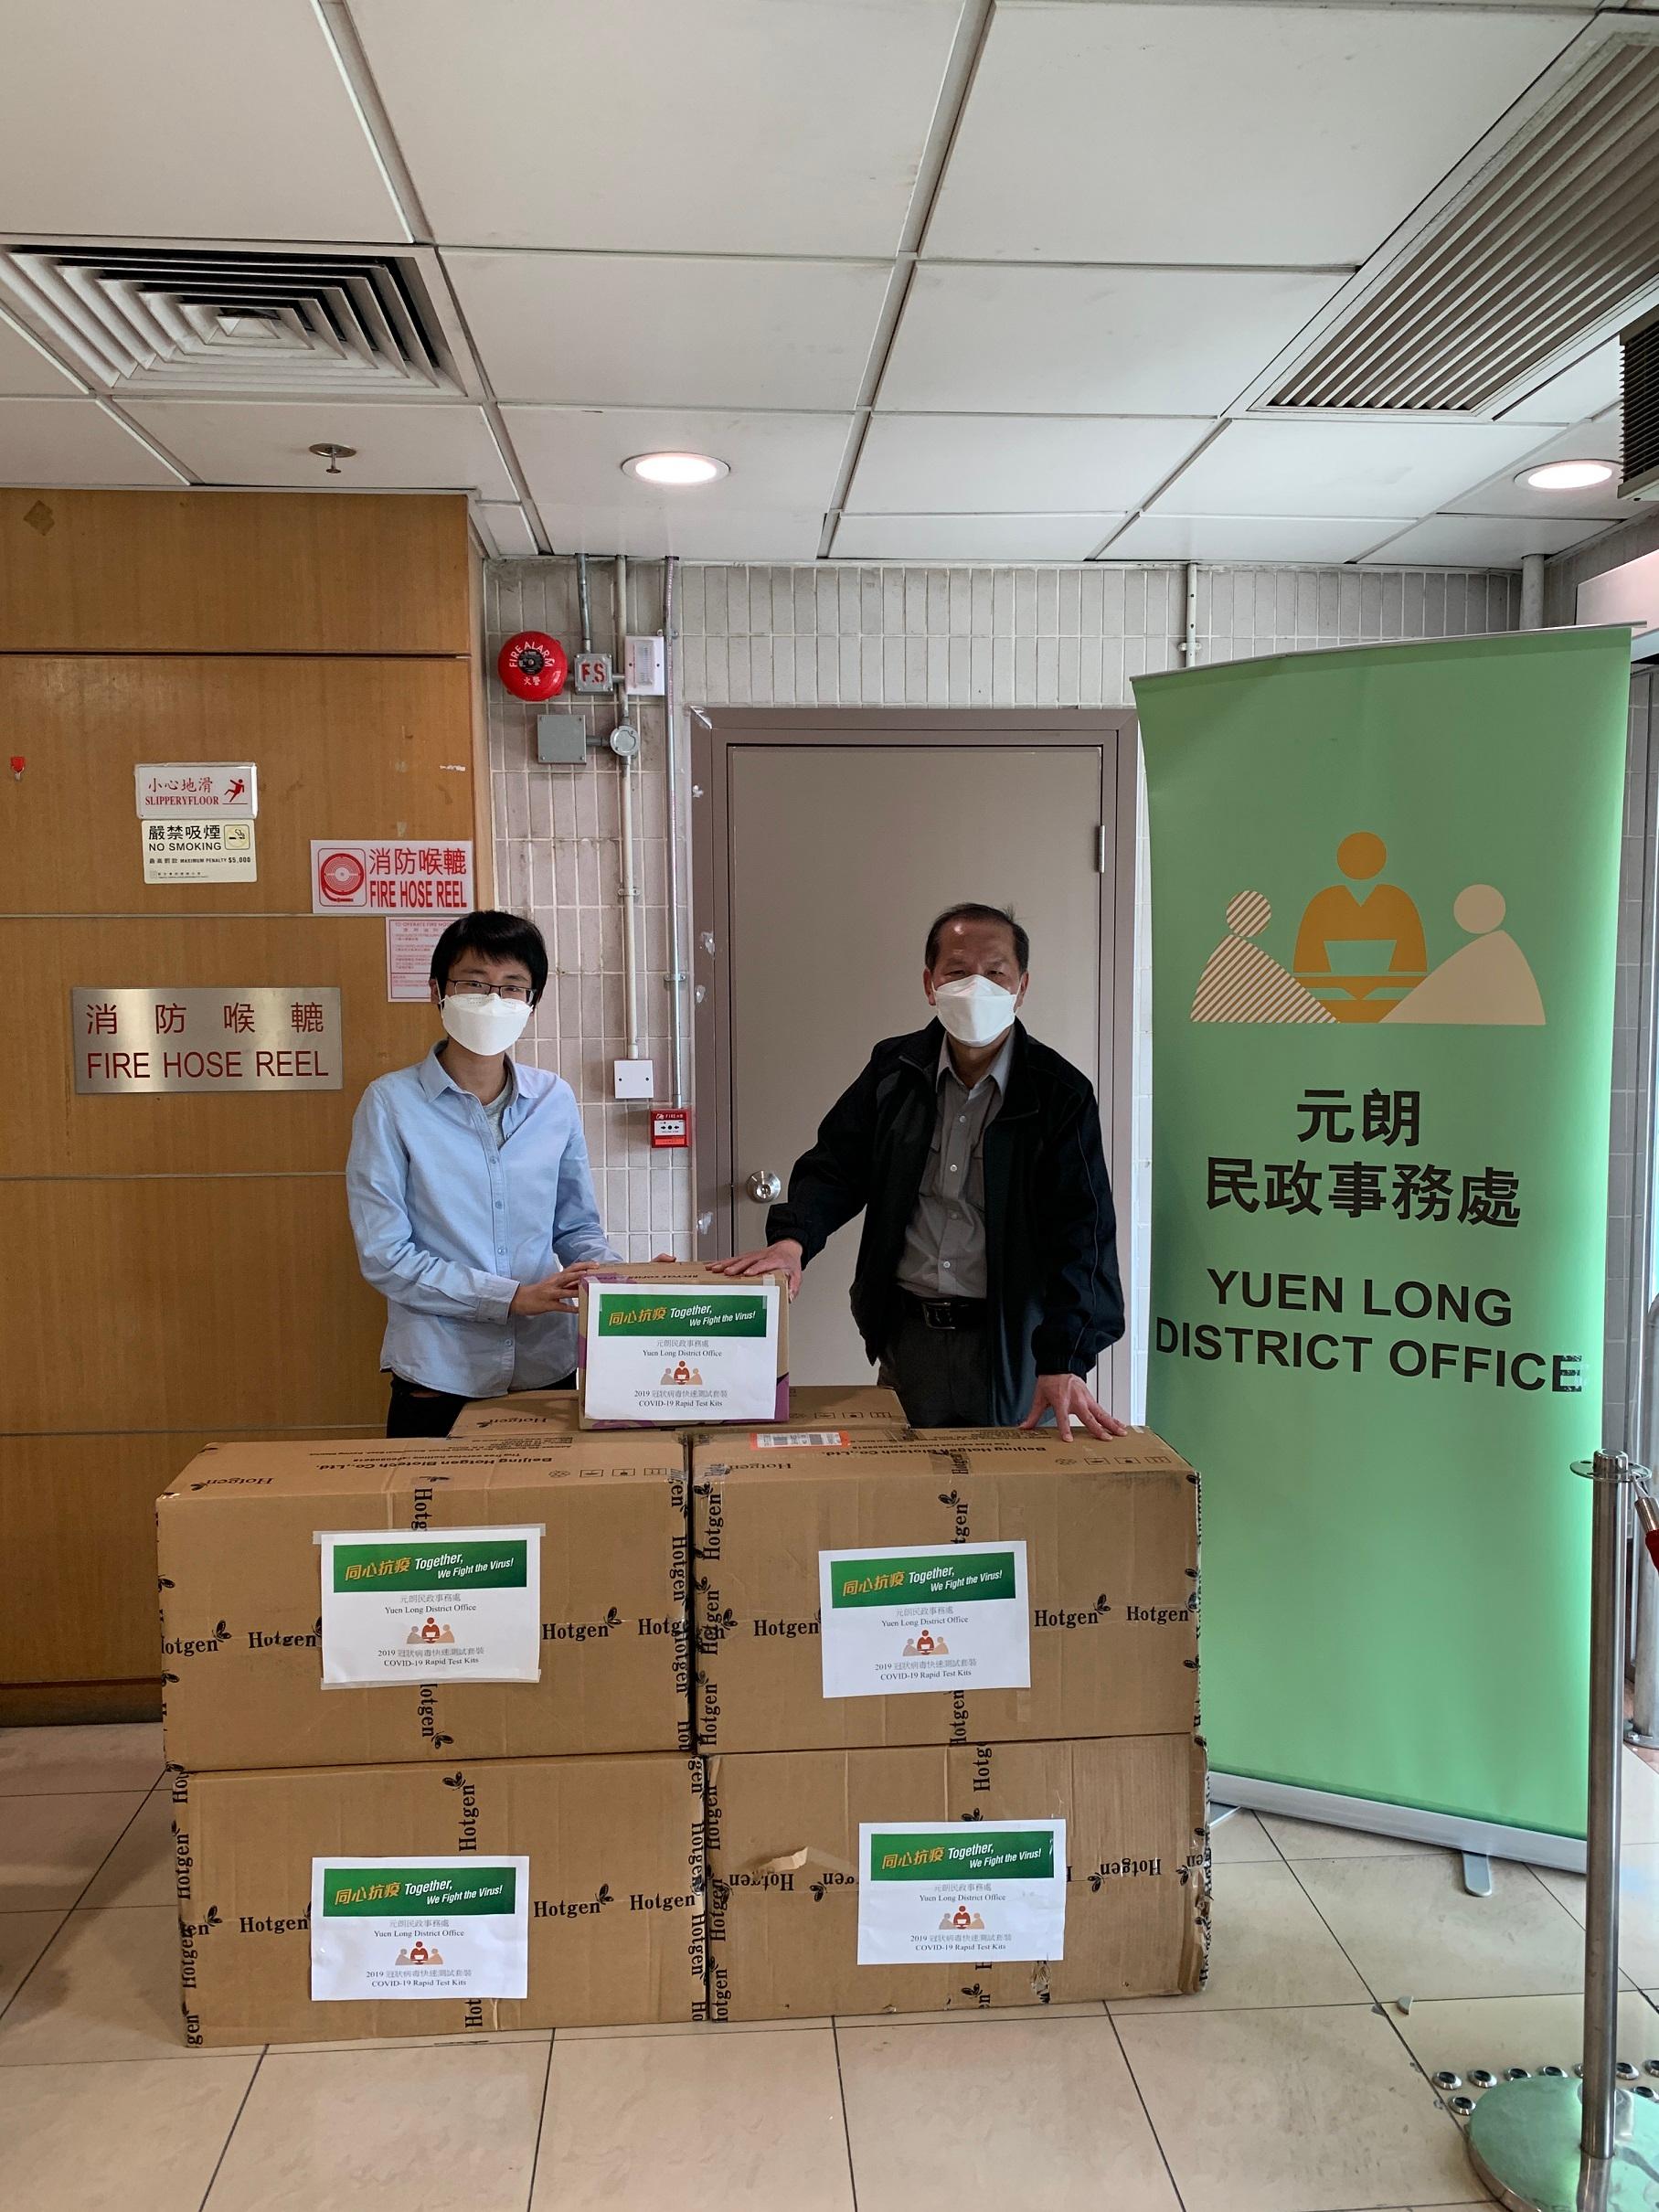 The Yuen Long District Office today (March 1) distributed COVID-19 rapid test kits to households, cleansing workers and property management staff living and working in Heng Chui House and Heng Chun House of Tin Heng Estate, Tin Shui Wai for voluntary testing through the Housing Department.